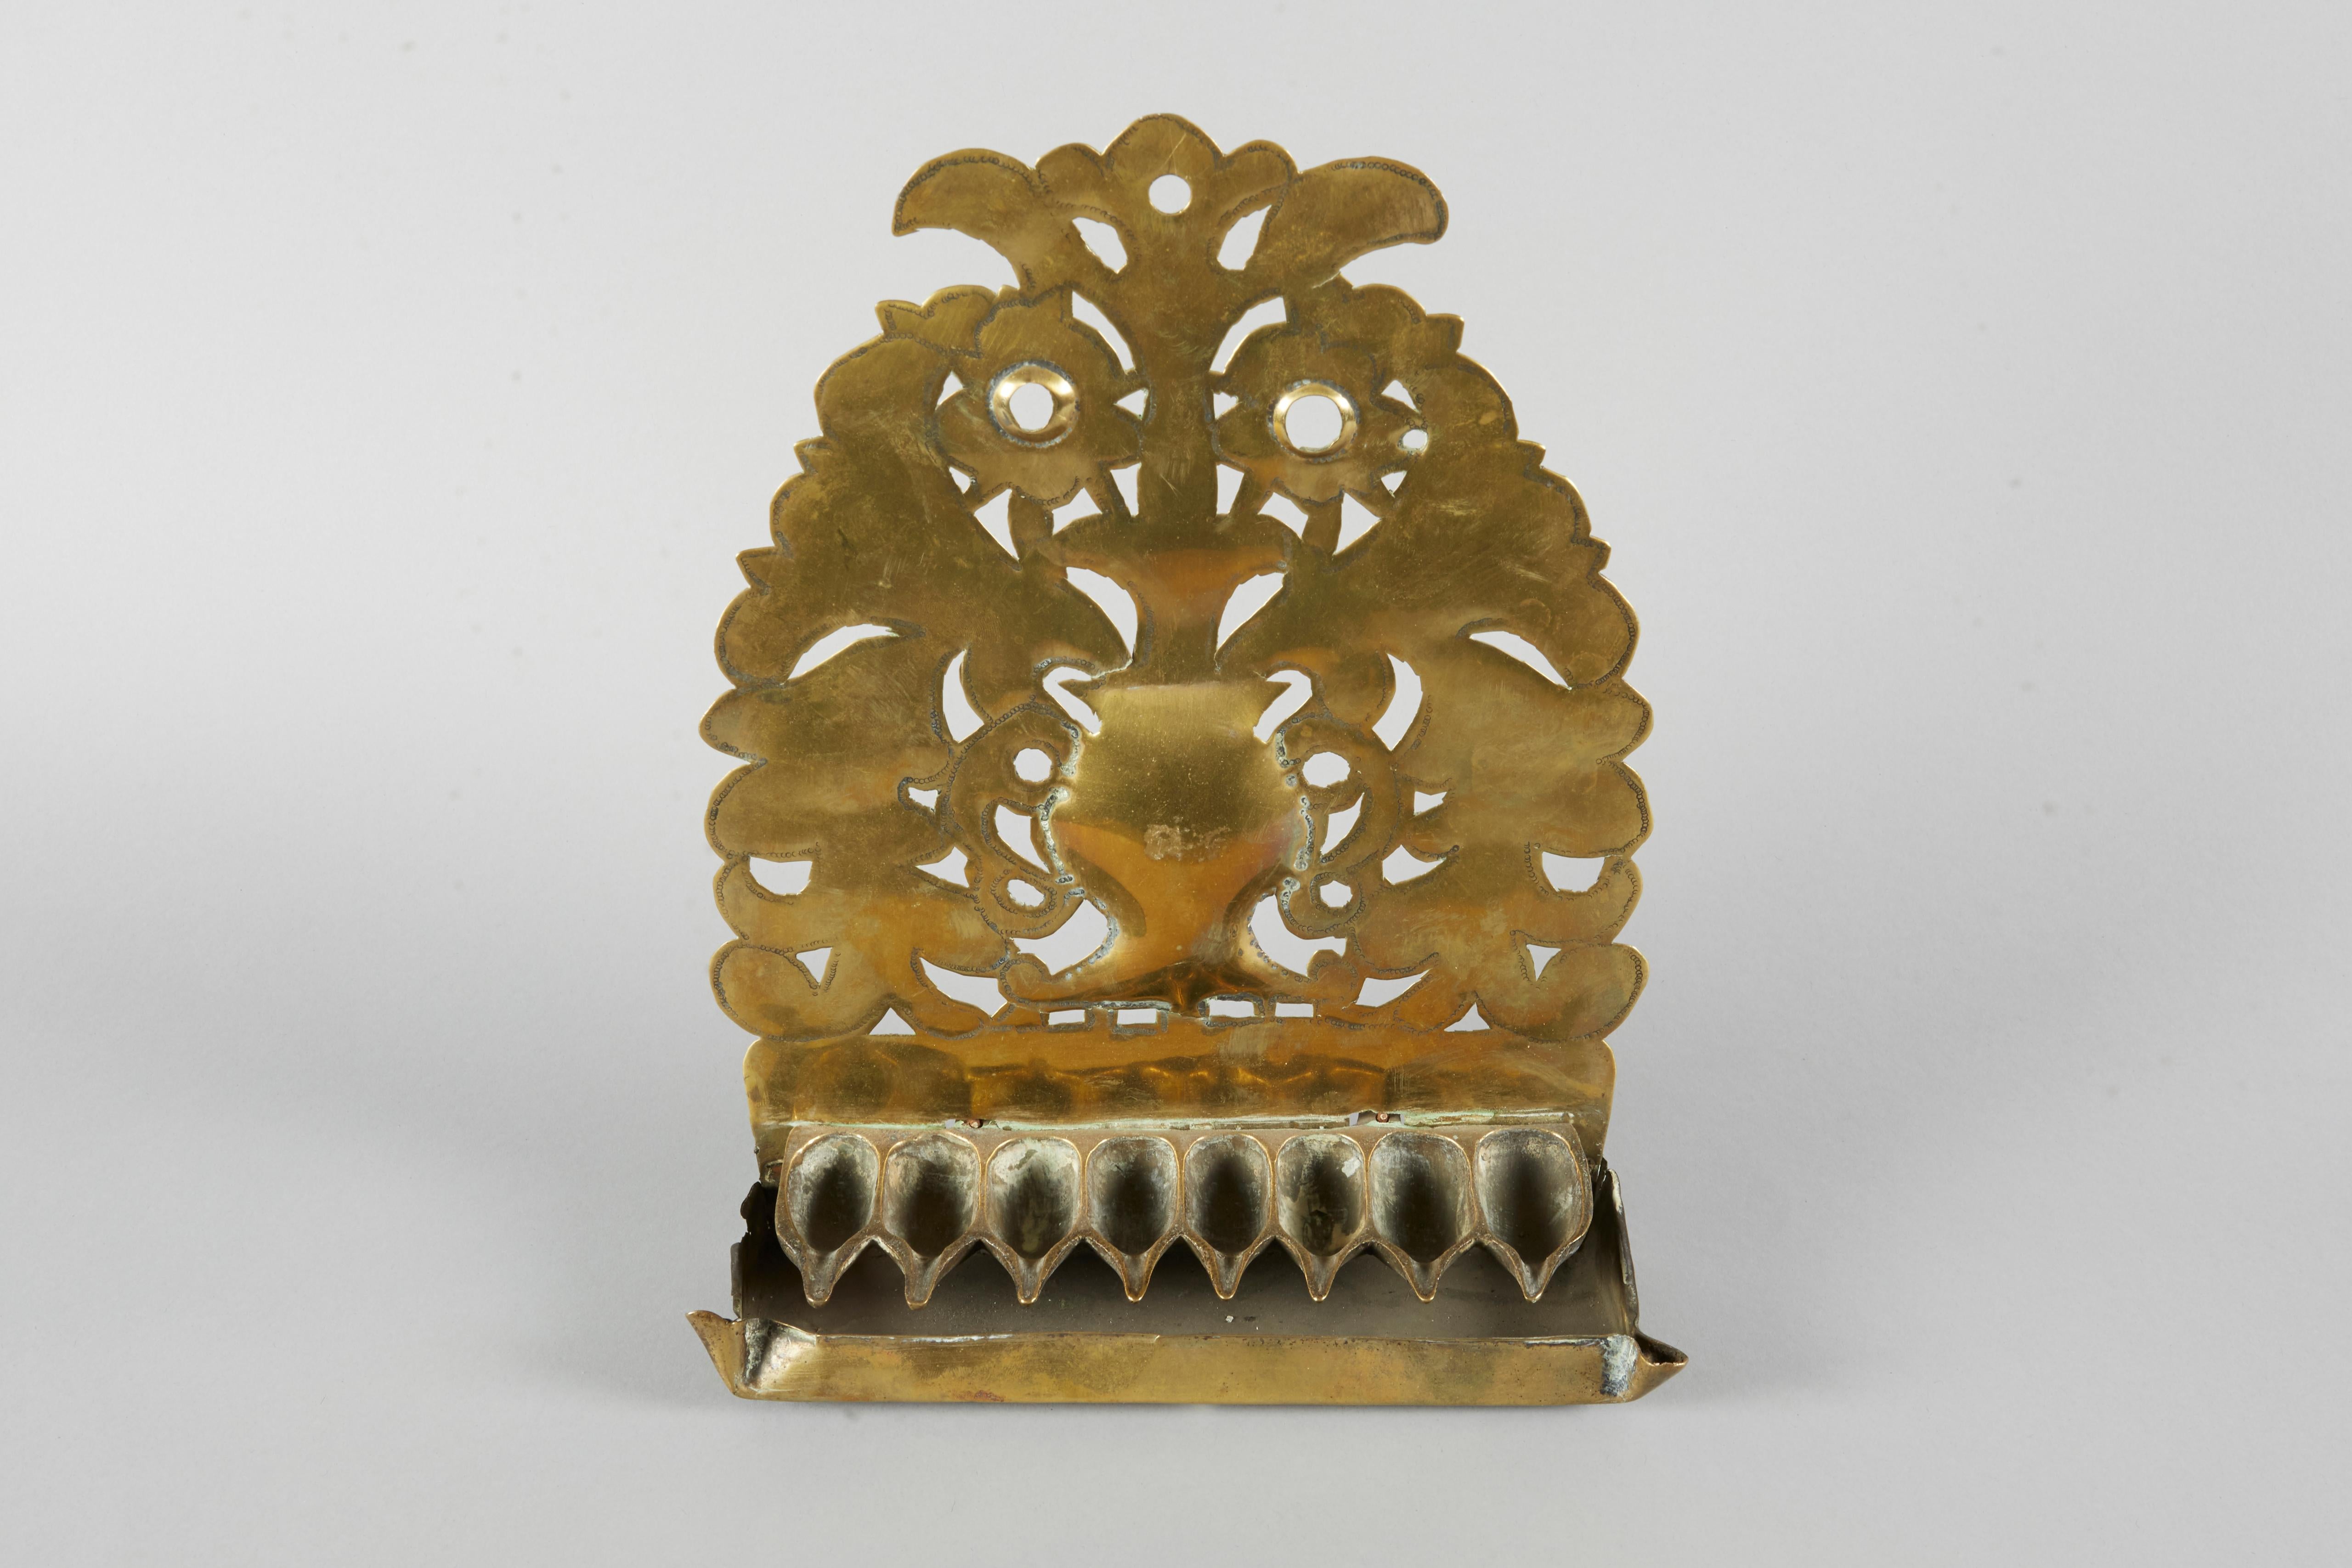 Brass Hanukkah Lamp Menorah, The Netherlands, circa 1730. 
The backplate is pierced and embossed with floral motifs around the vessel in the center and fitted with a row of eight oil pans.